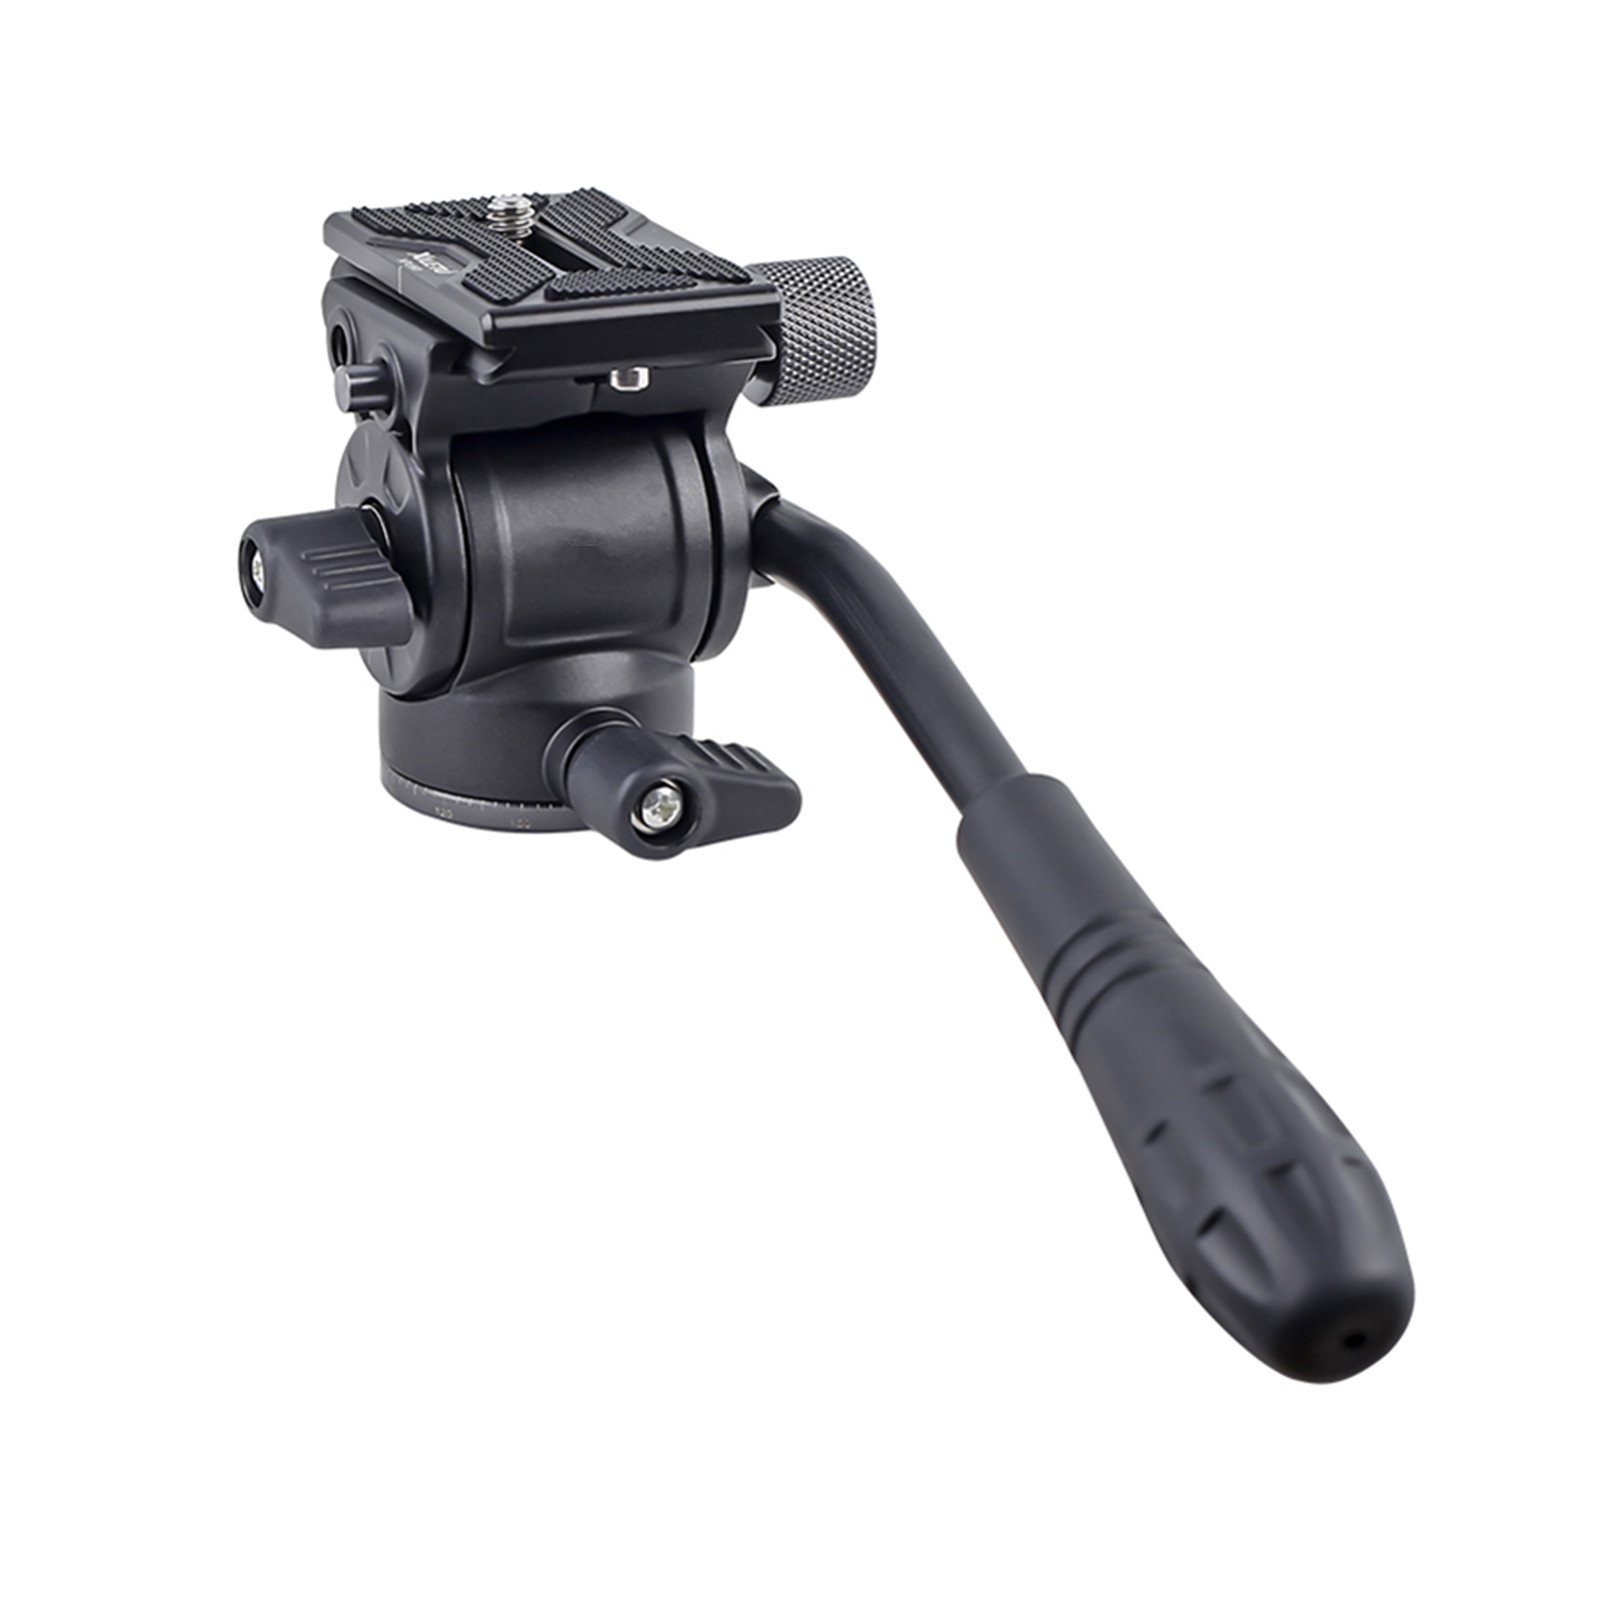 MOSHUSO PH40 Video Fluid Tripod Head for Compact Video Cameras and DSLR Cameras